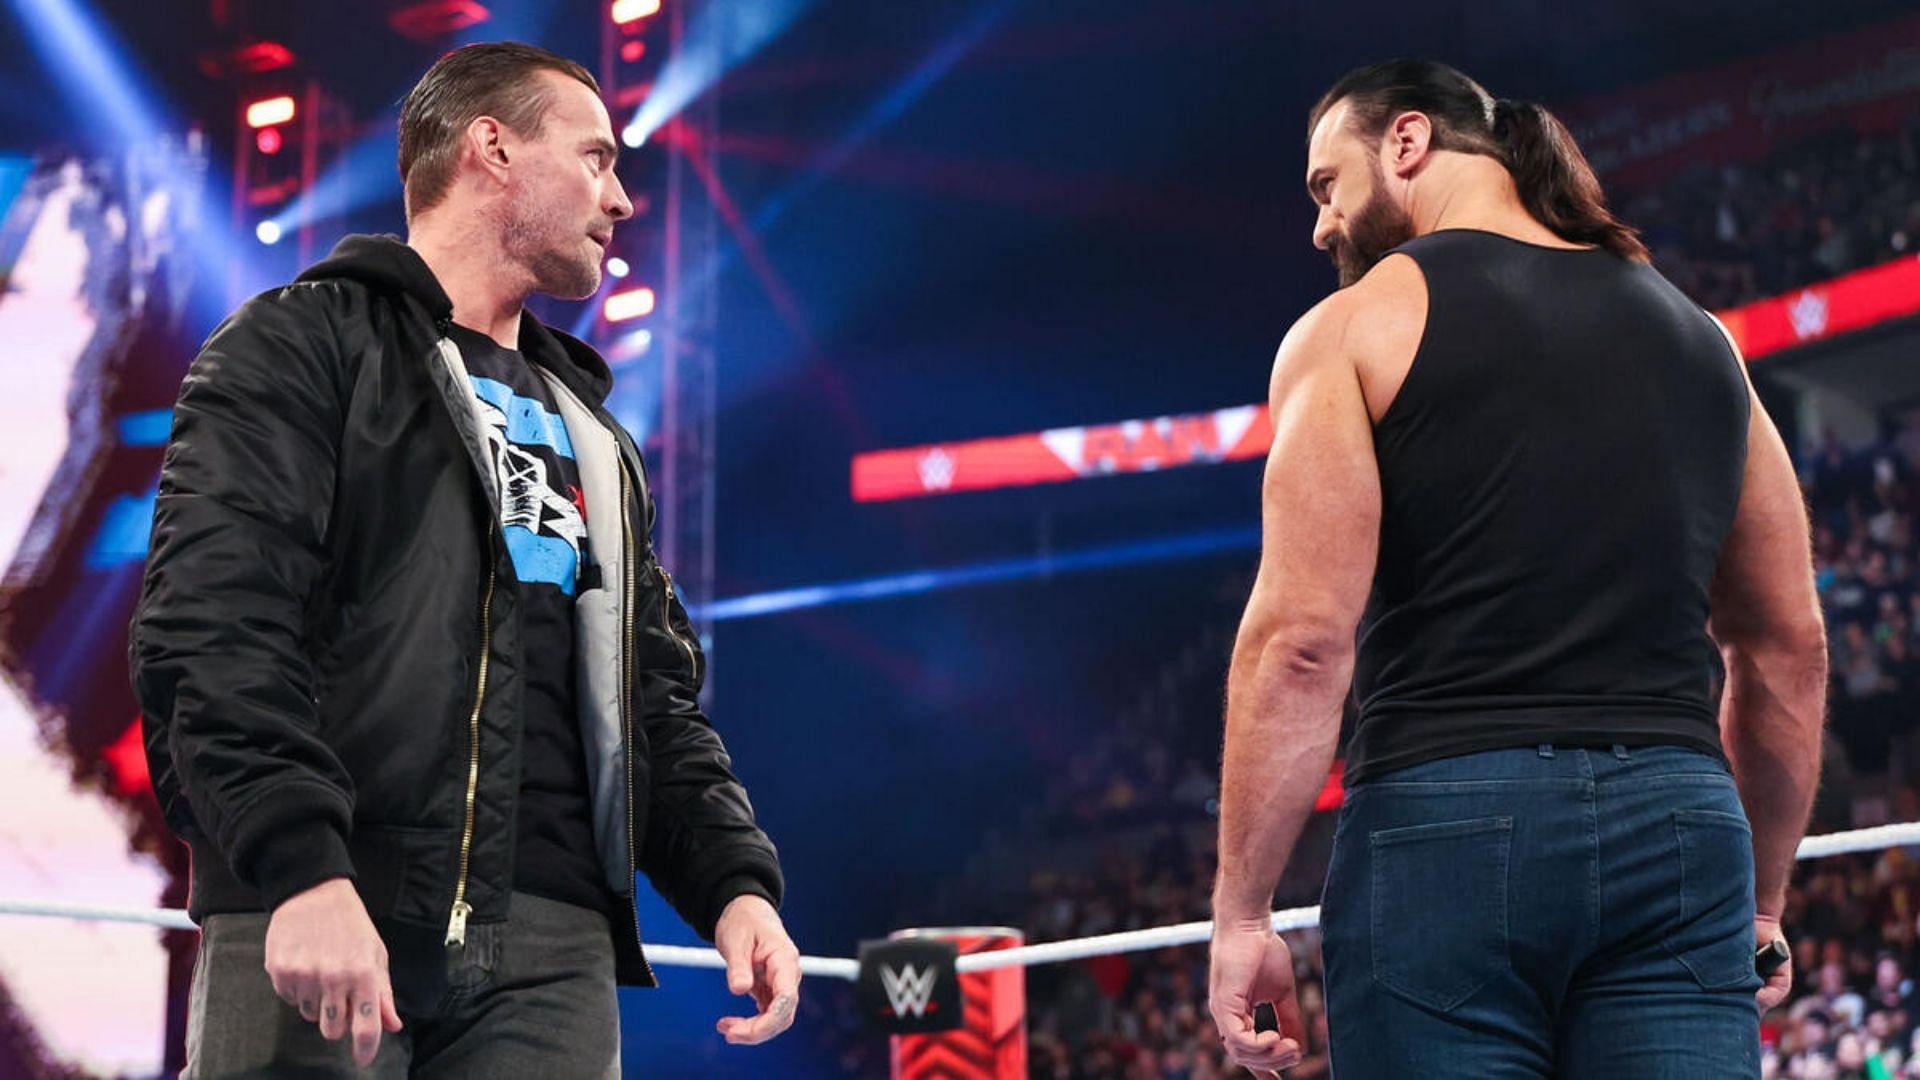 CM Punk and Drew McIntyre came face-to-face on RAW in the past